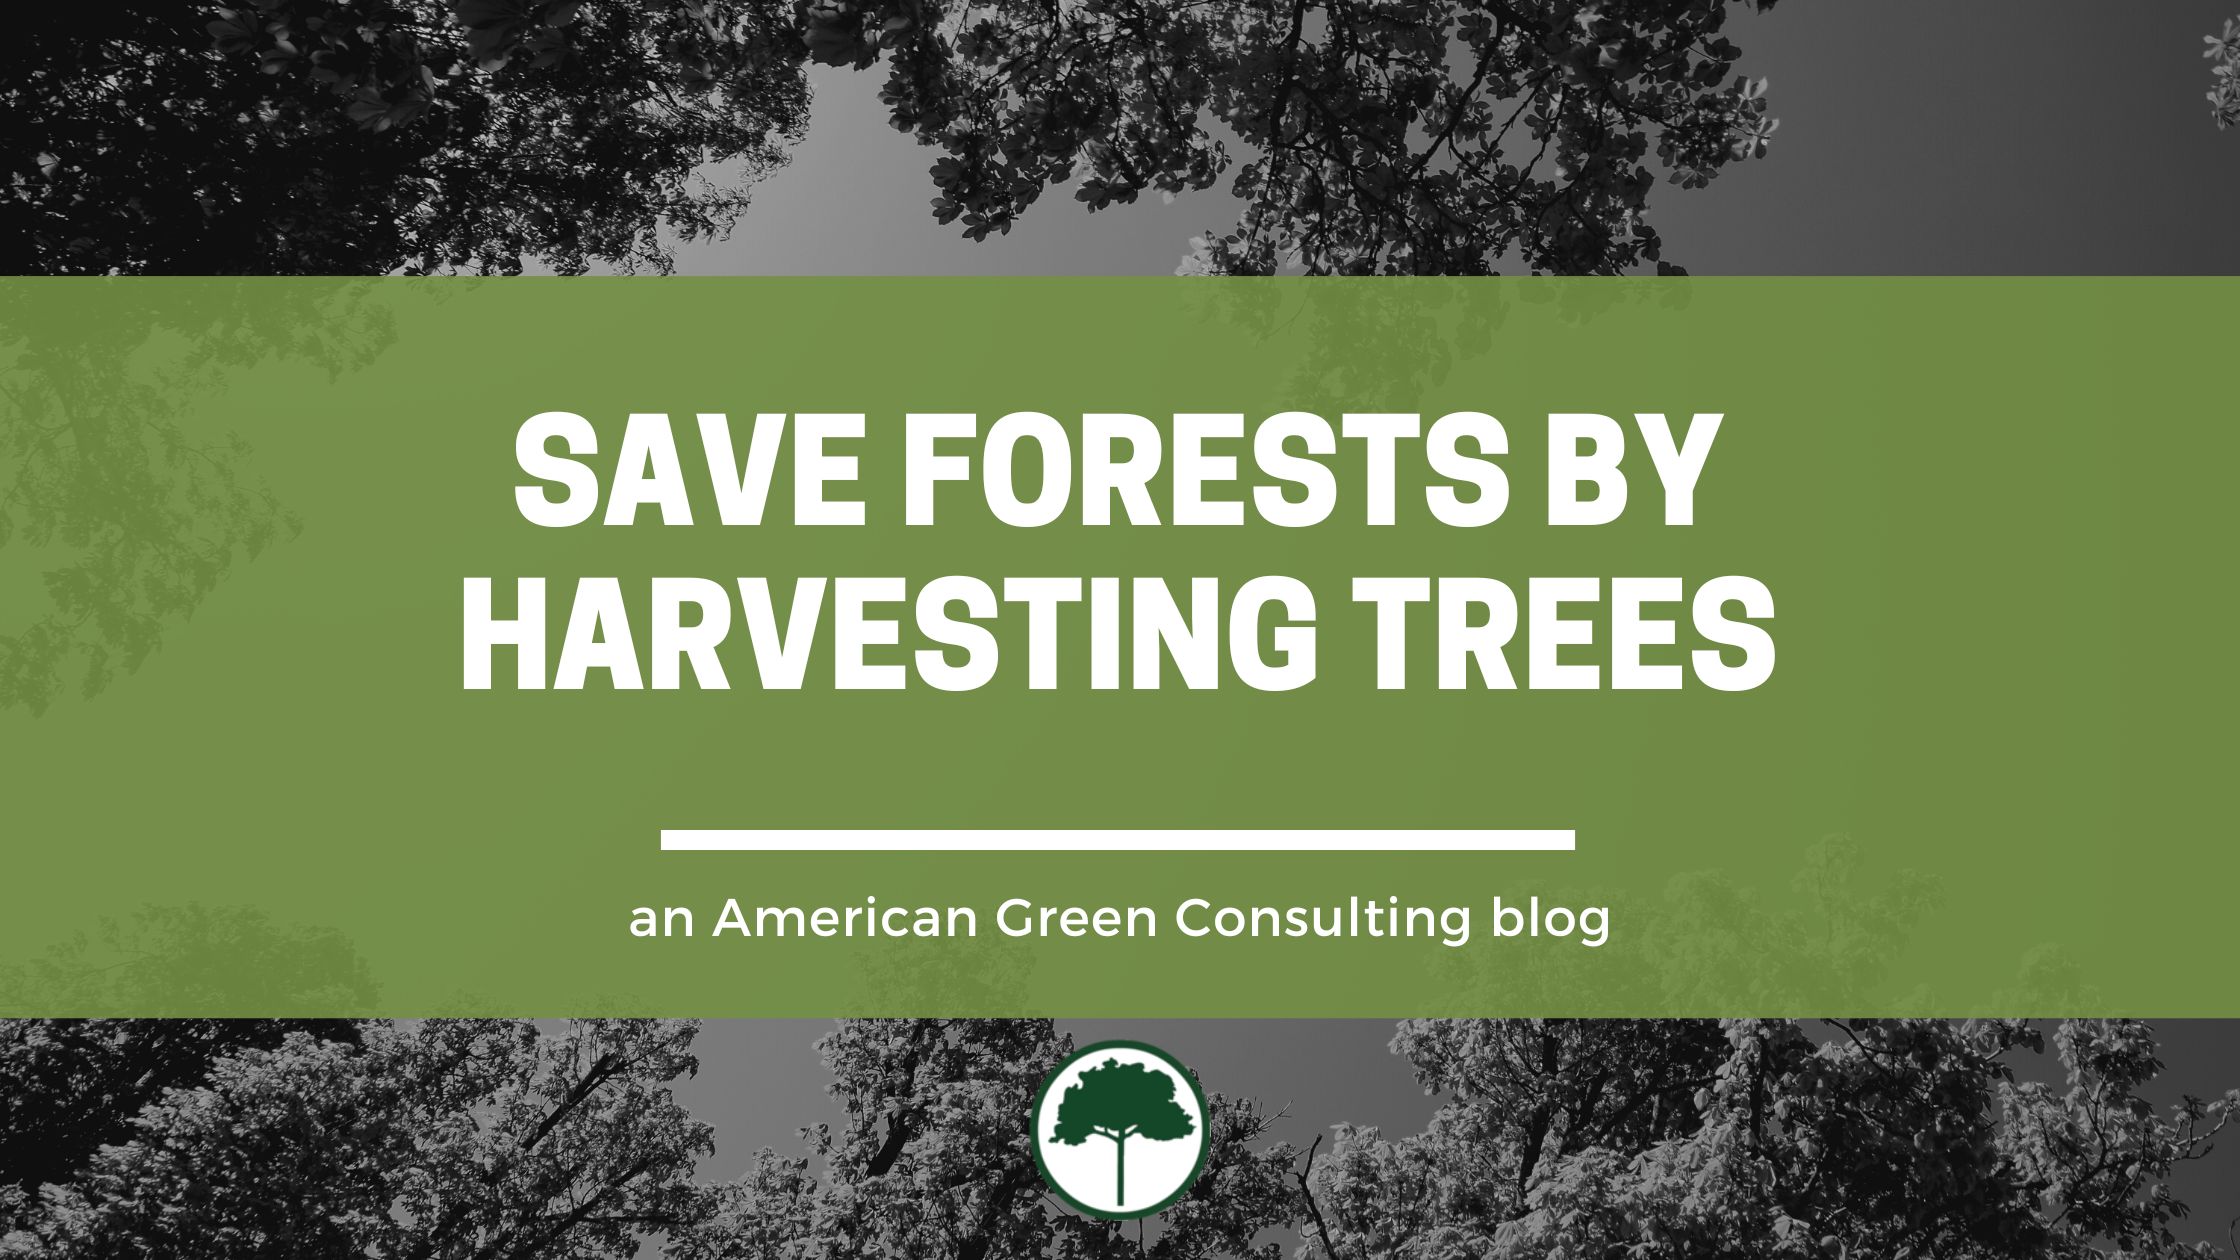 Save Forests By Harvesting Trees